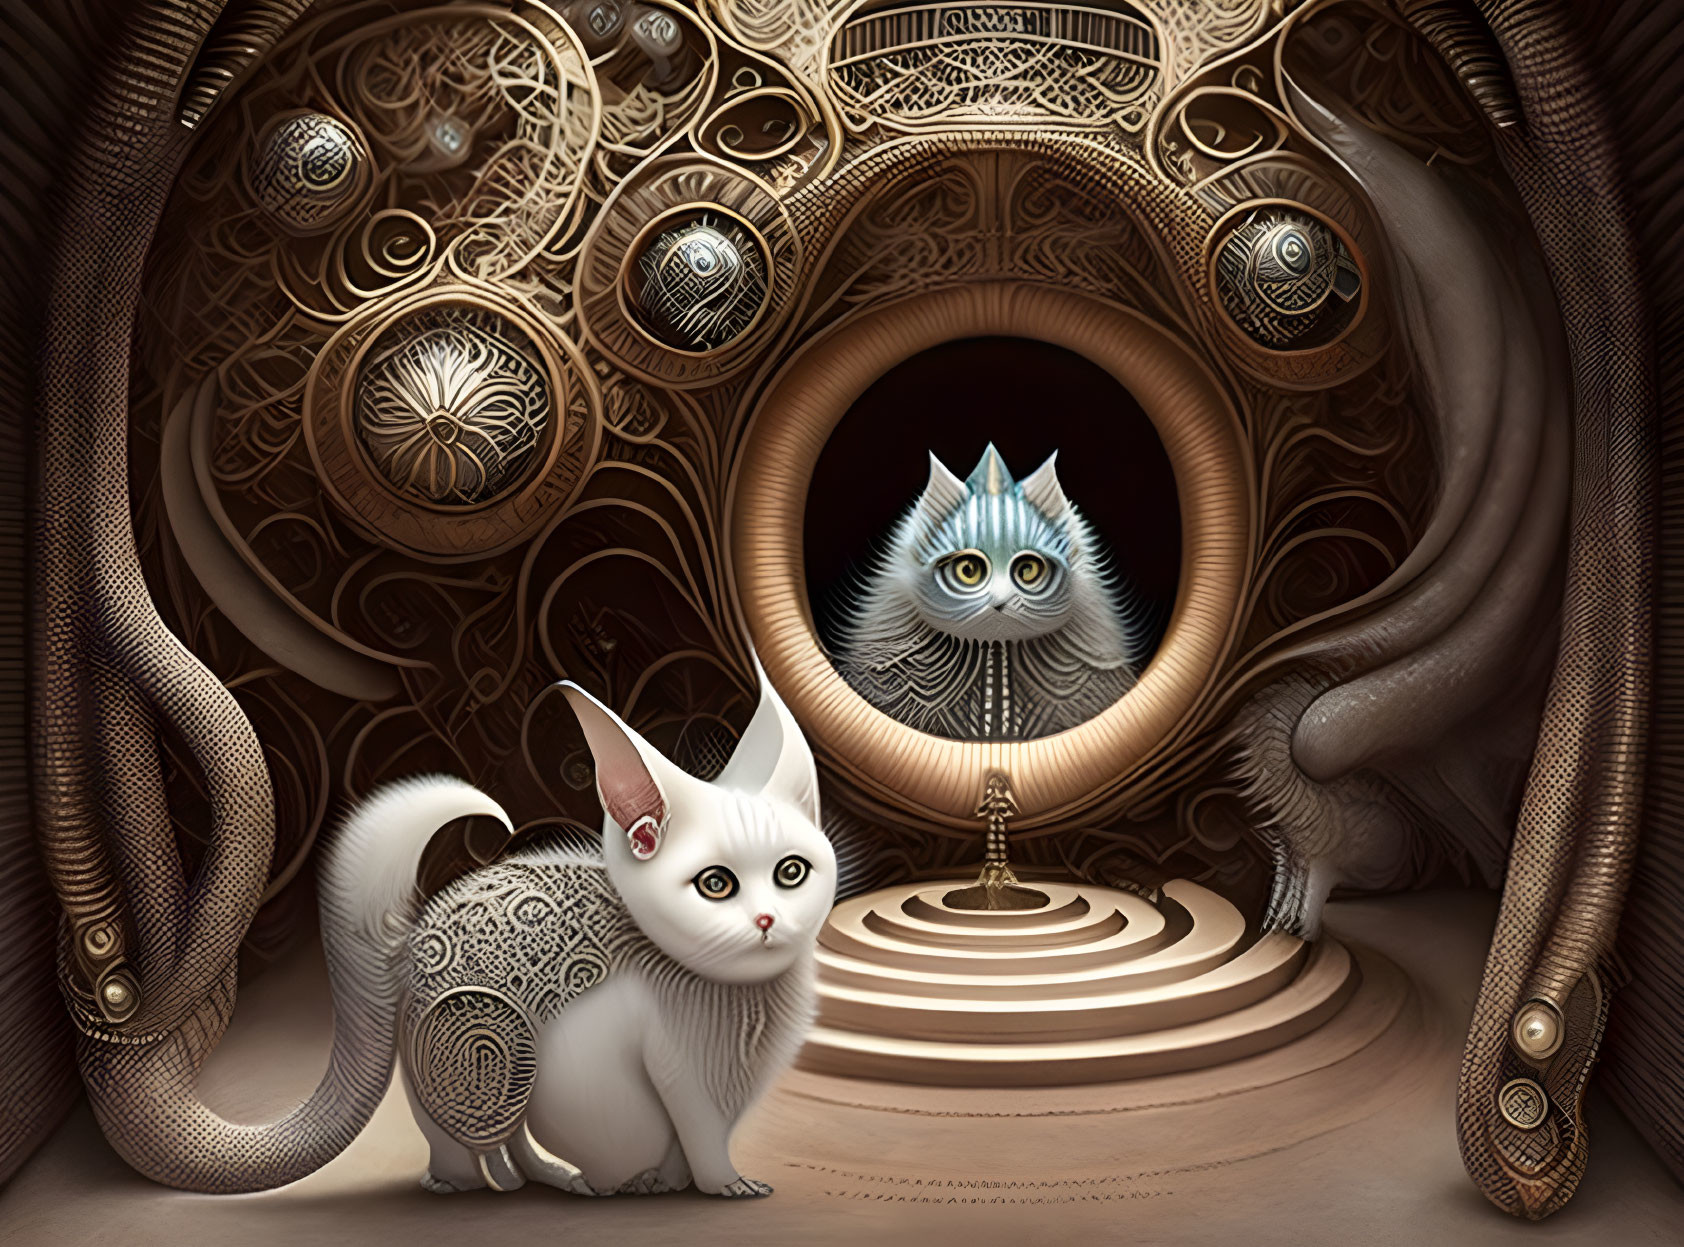 Surreal white cat and blue-eyed owl in ornate cylindrical chamber